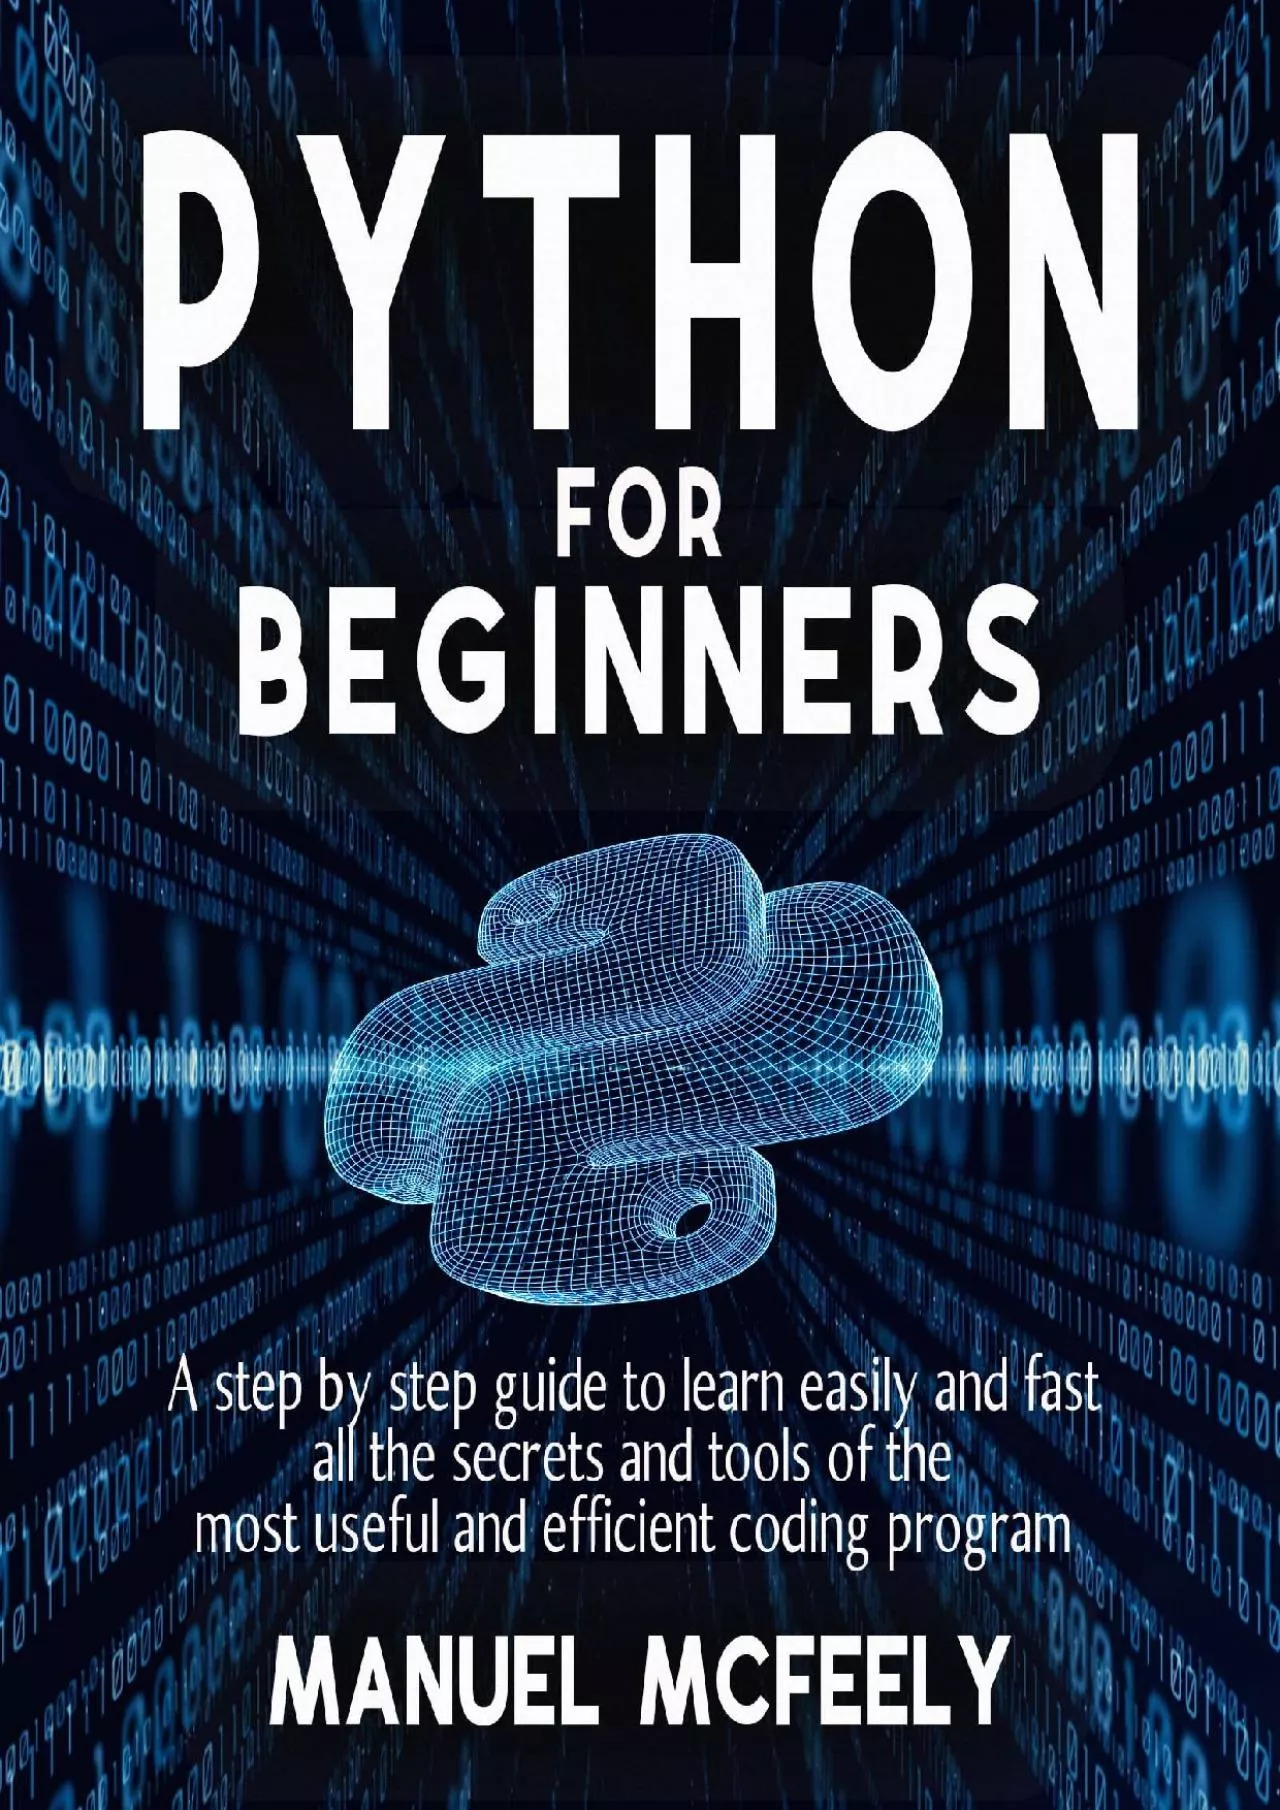 [READ]-PYTHON FOR BEGINNERS: A Step by Step Guide to Learn Easily and Fast all the Secrets